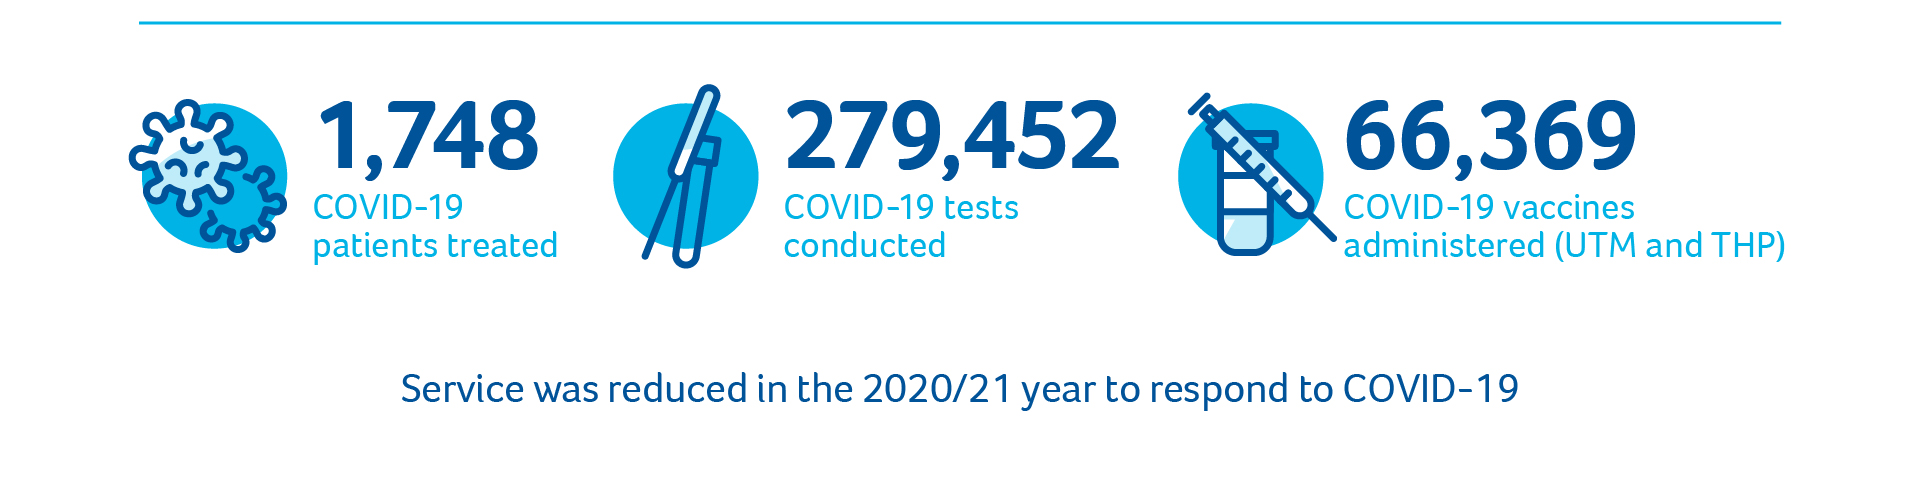 1,748 COVID-19 patients treated. 279,452 COVID-19 test conducted. 66,369 COVID-19 vaccines administered